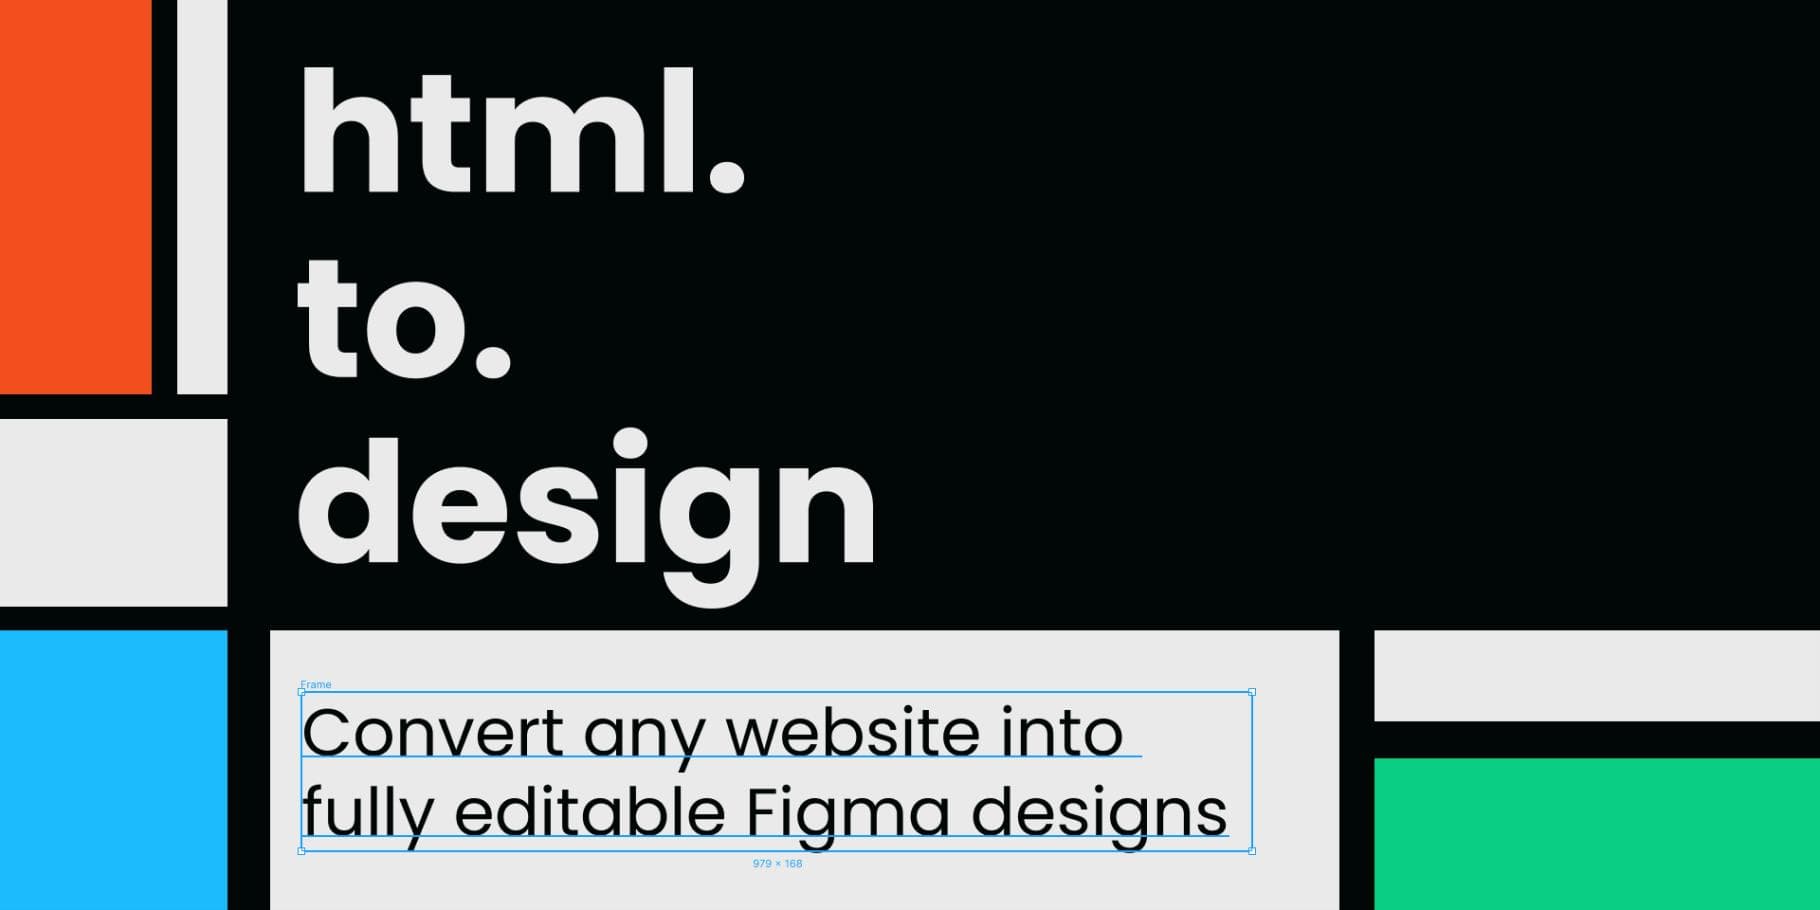 html.to.design logo over Figma text element stating 'Convert any website into fully editable Figma designs'